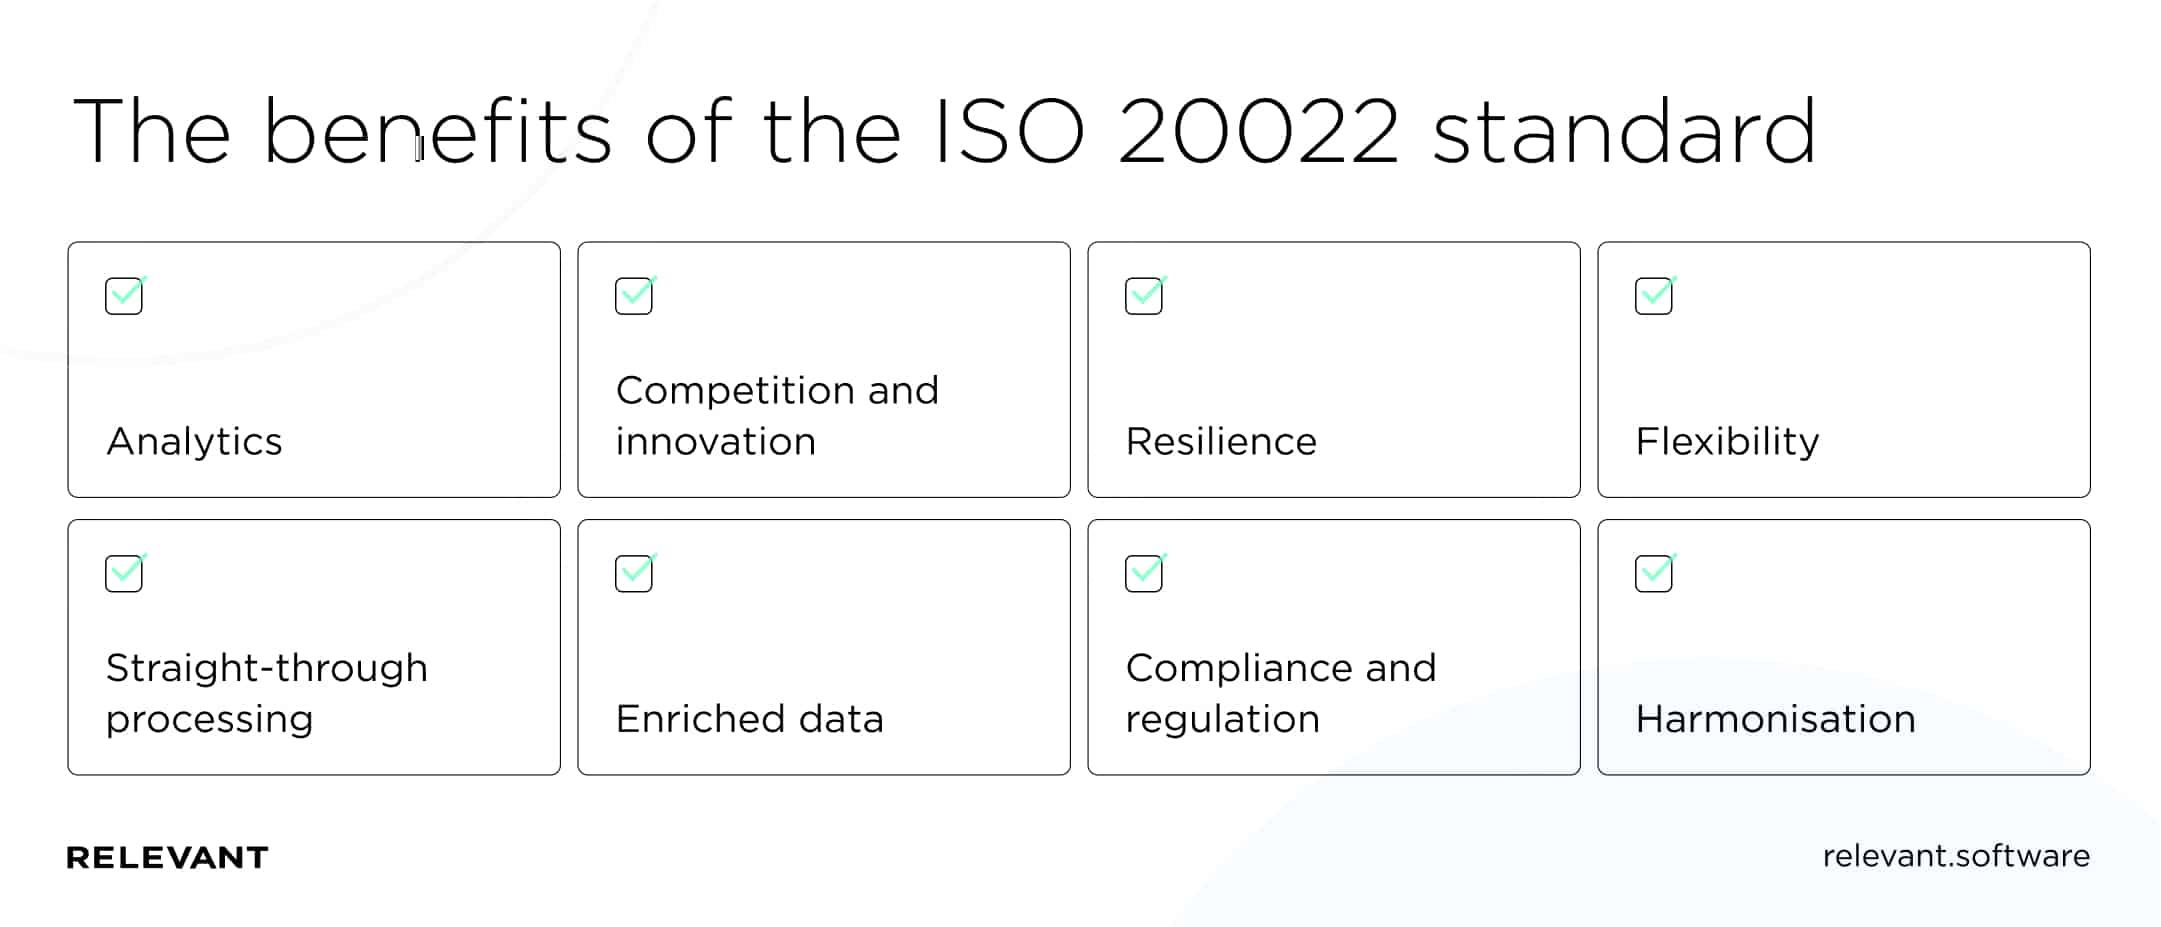 The benefits of the ISO20022 standard